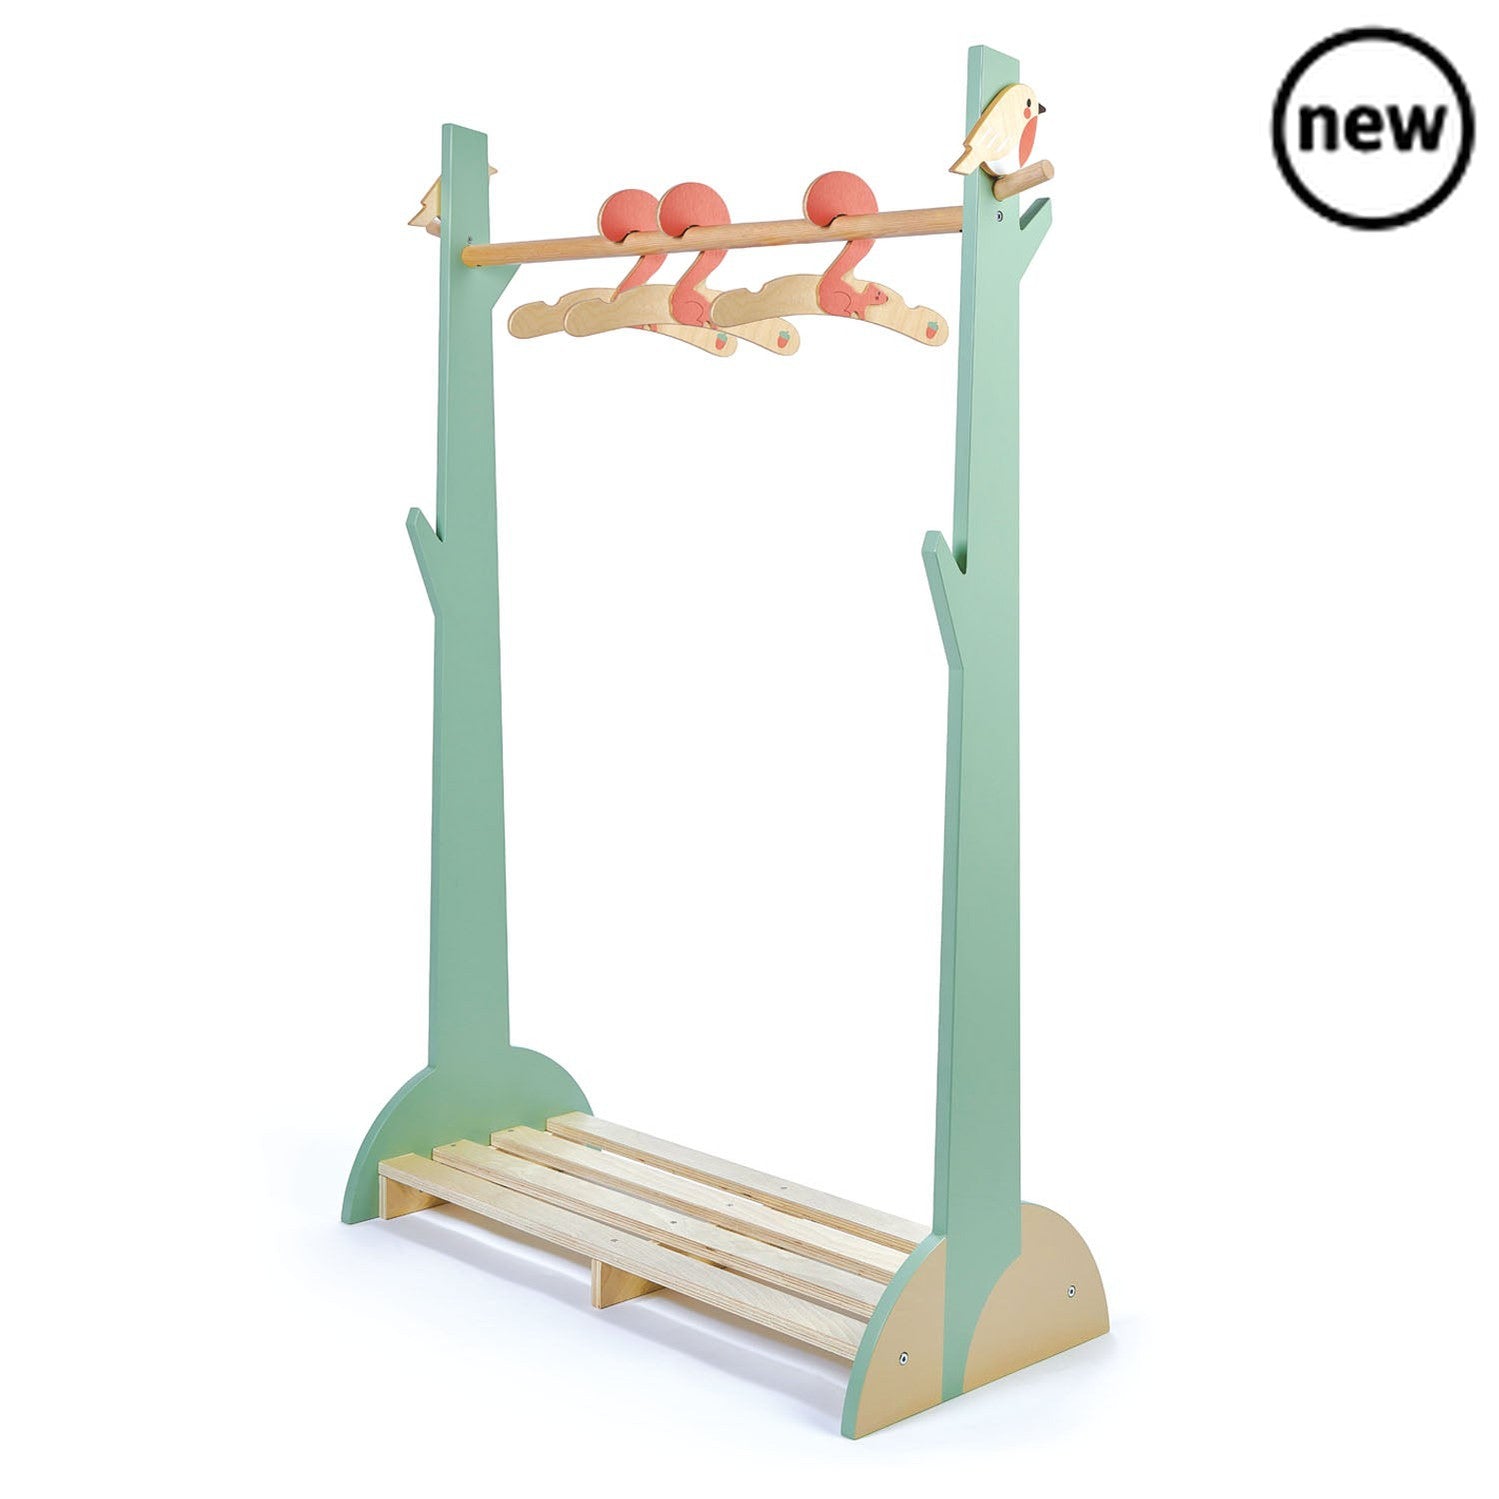 Tenderleaf Toys Wooden Forest Clothes Rail, Introducing the Tenderleaf Toys Wooden Forest Clothes Rail, a delightful addition to any child's bedroom or playroom. Designed and made with utmost care by Tenderleaf Toys, this clothes rail combines functionality with a charming woodland-inspired aesthetic.With its fresh and clean design, this clothes rail is the perfect height for little ones to independently hang up their clothes or store their shoes and bags on the base. Encourage your child to develop their o